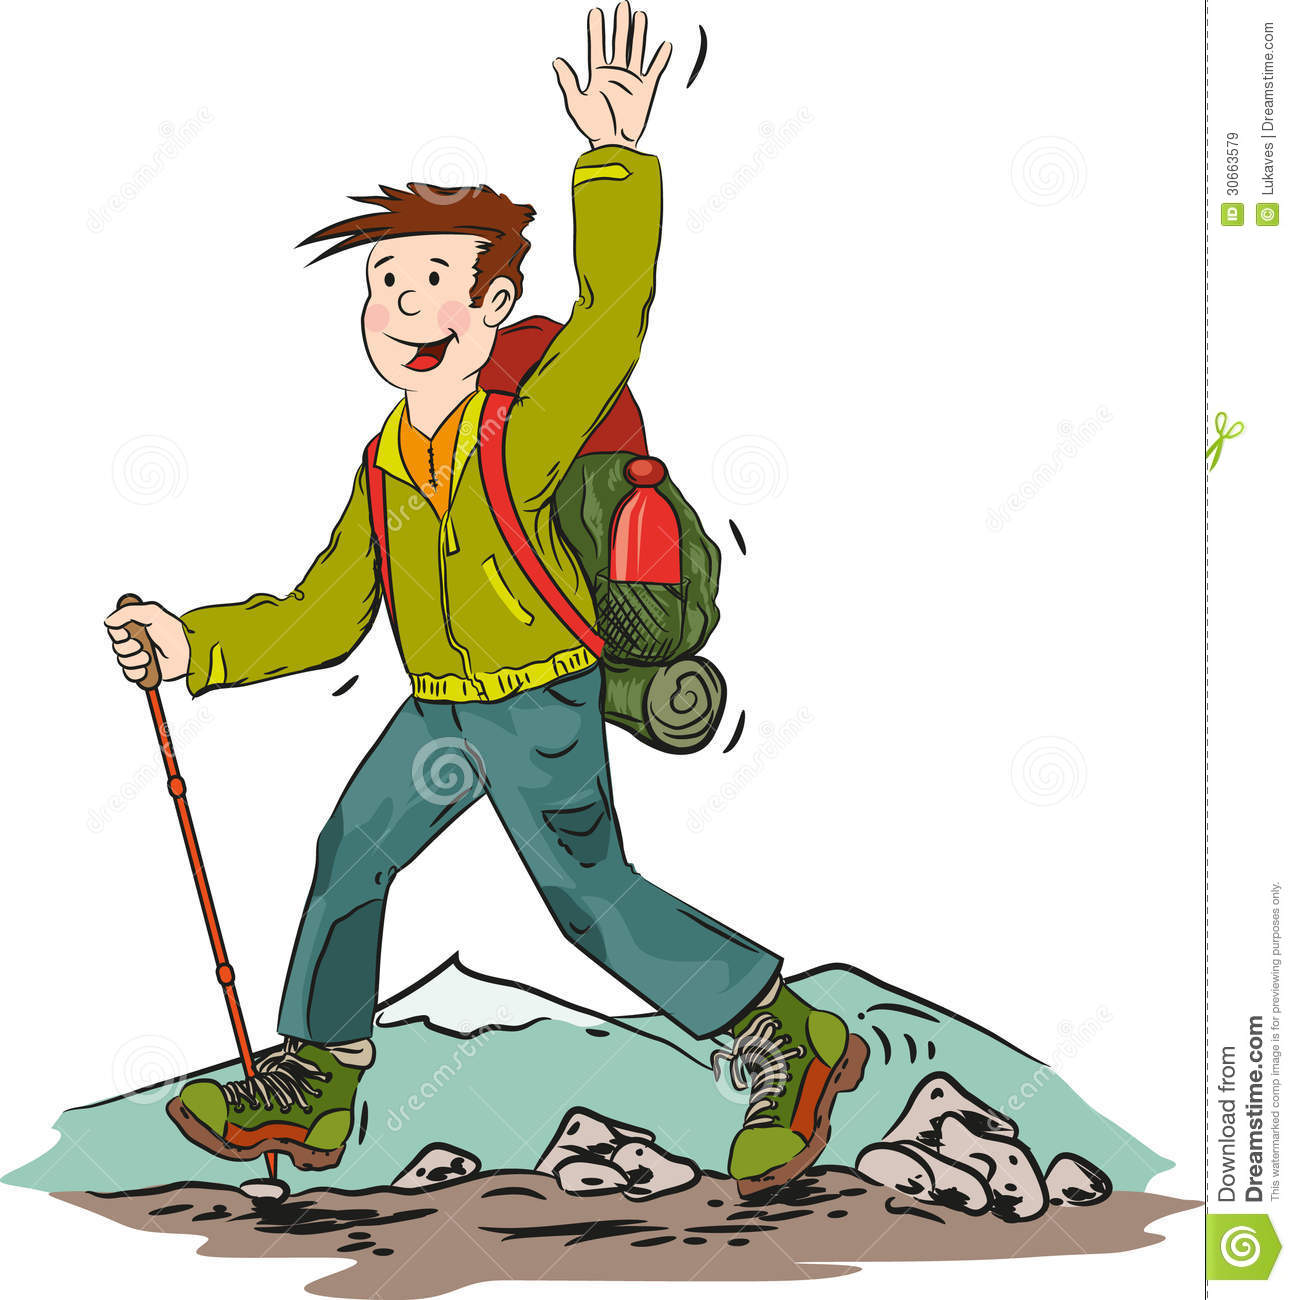 Hiker Royalty Free Stock Images   Image  30663579